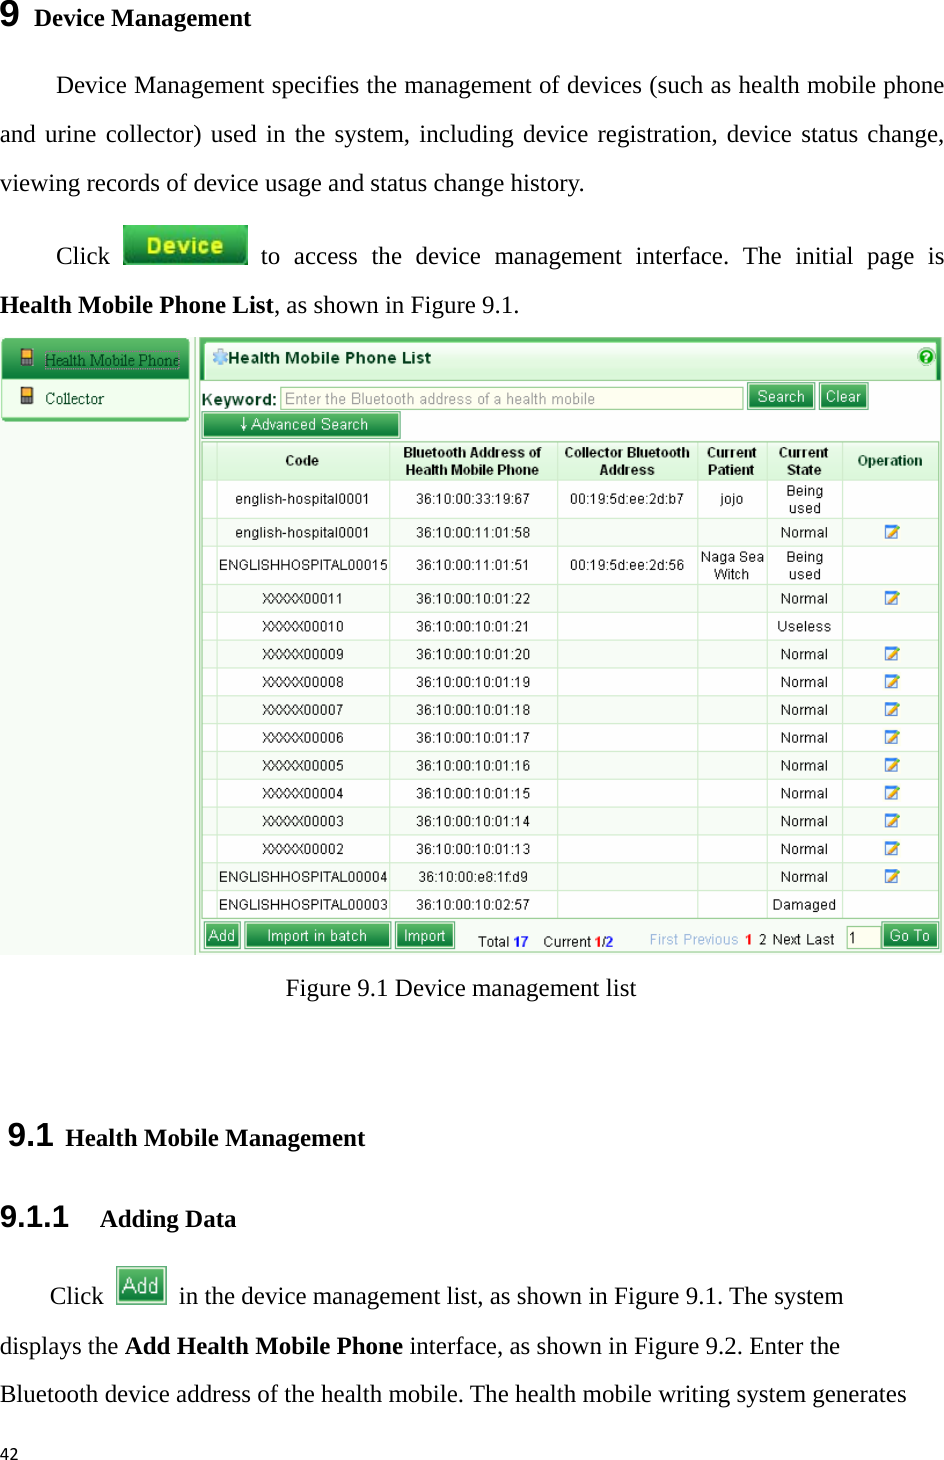 429  Device Management Device Management specifies the management of devices (such as health mobile phone and urine collector) used in the system, including device registration, device status change, viewing records of device usage and status change history.   Click   to access the device management interface. The initial page is Health Mobile Phone List, as shown in Figure 9.1.    Figure 9.1 Device management list  9.1 Health Mobile Management 9.1.1   Adding Data Click    in the device management list, as shown in Figure 9.1. The system displays the Add Health Mobile Phone interface, as shown in Figure 9.2. Enter the Bluetooth device address of the health mobile. The health mobile writing system generates 